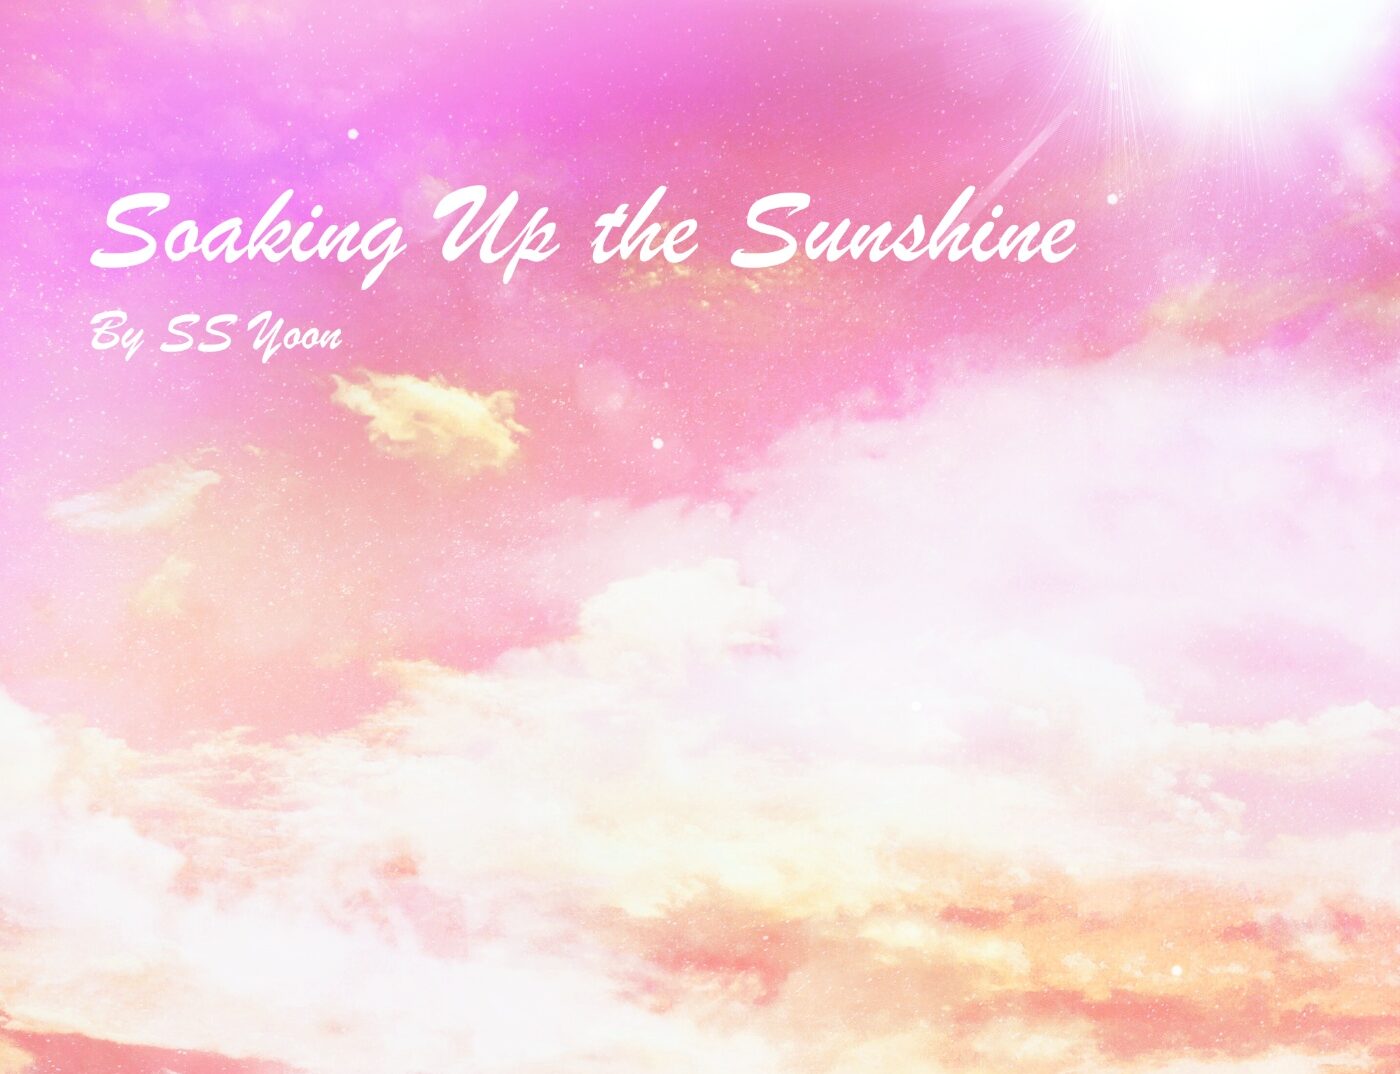 SS Yoon – new release – Soaking Up the Sunshine